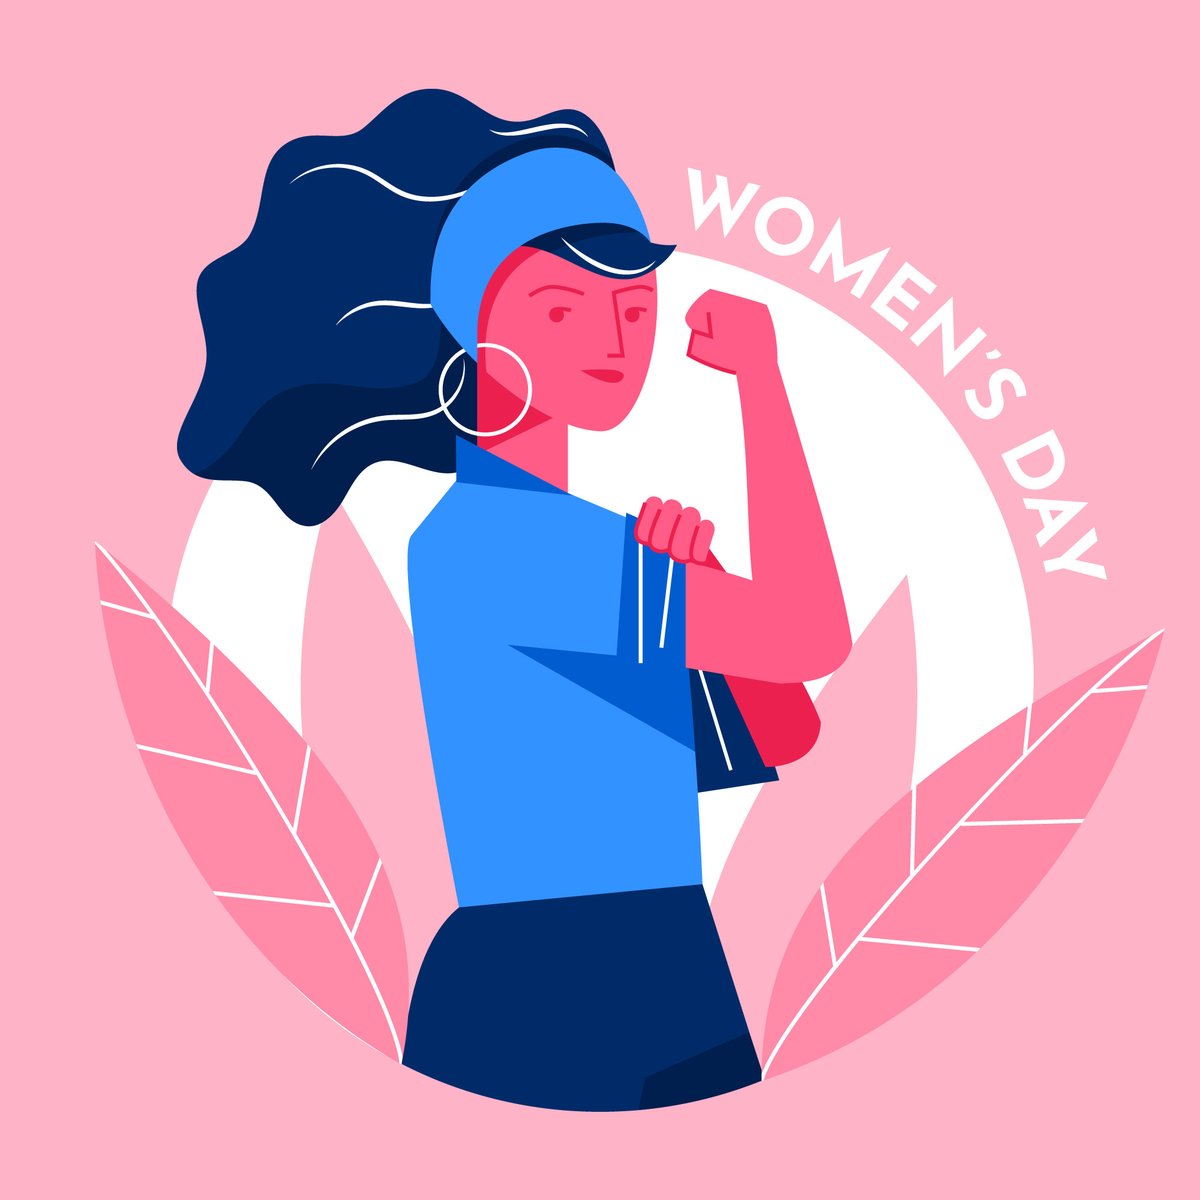 🌸 Happy Women's Day! 🌸 Today, we celebrate the strength, resilience, and compassion of all the incredible women in our lives. At DrugFAM, we want to take a moment to honour the wives, mothers, sisters, carers, and friends who are affected by a loved one's addiction.